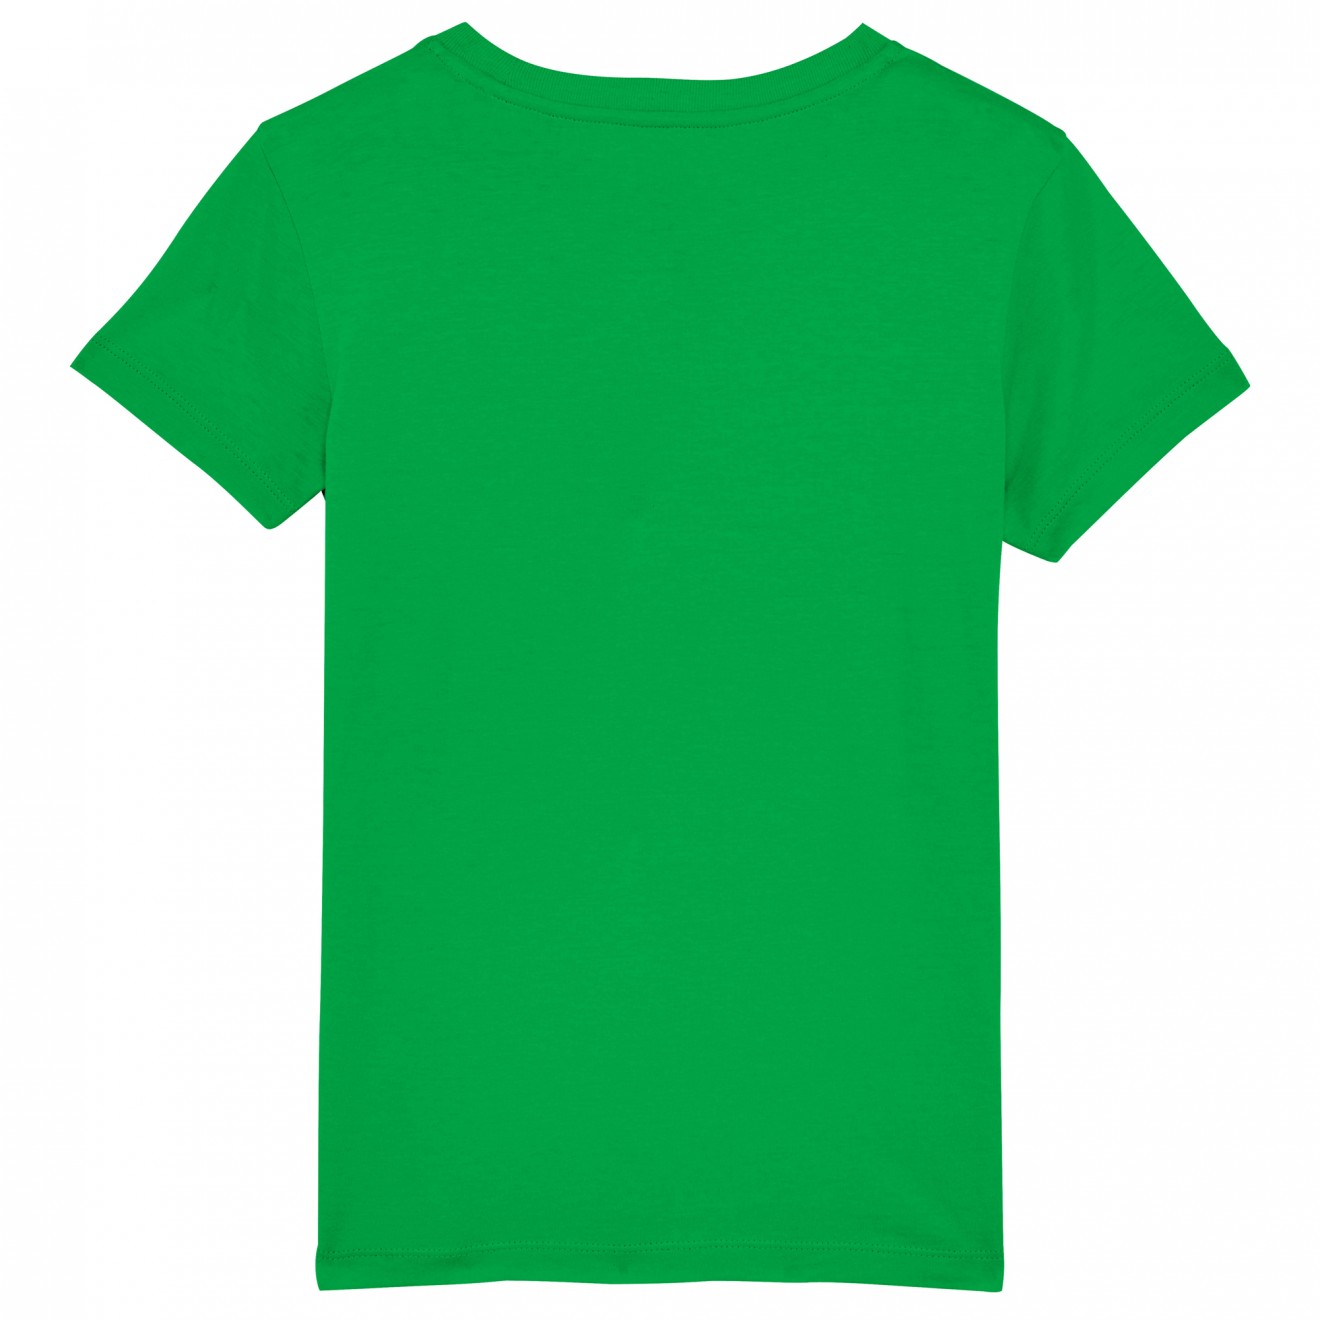 Image of the product Grumpy green, from the product category T-shirts